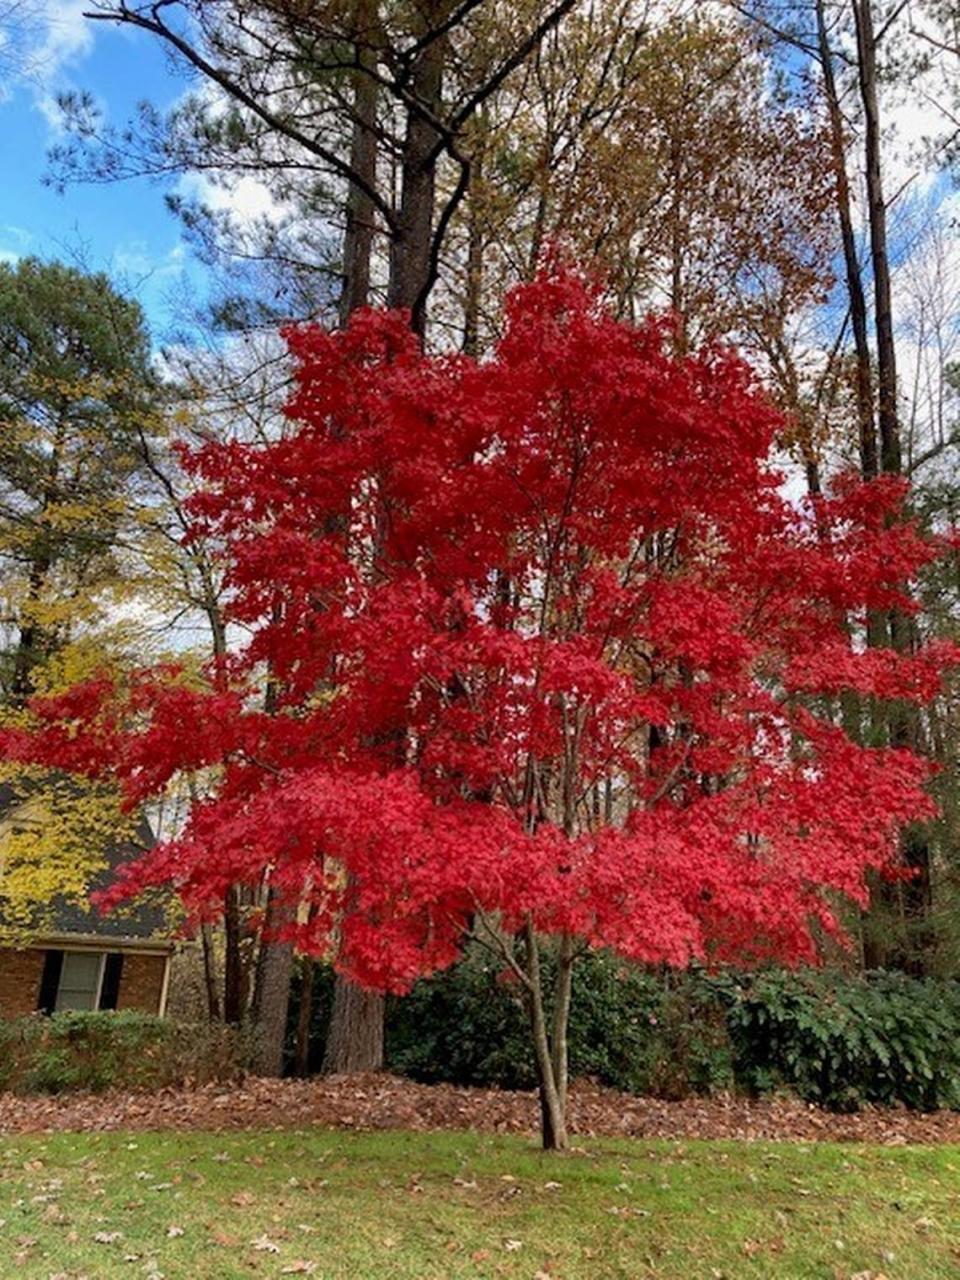 Reader Arthur Jackson’s favorite tree in the Triangle is in Raleigh.